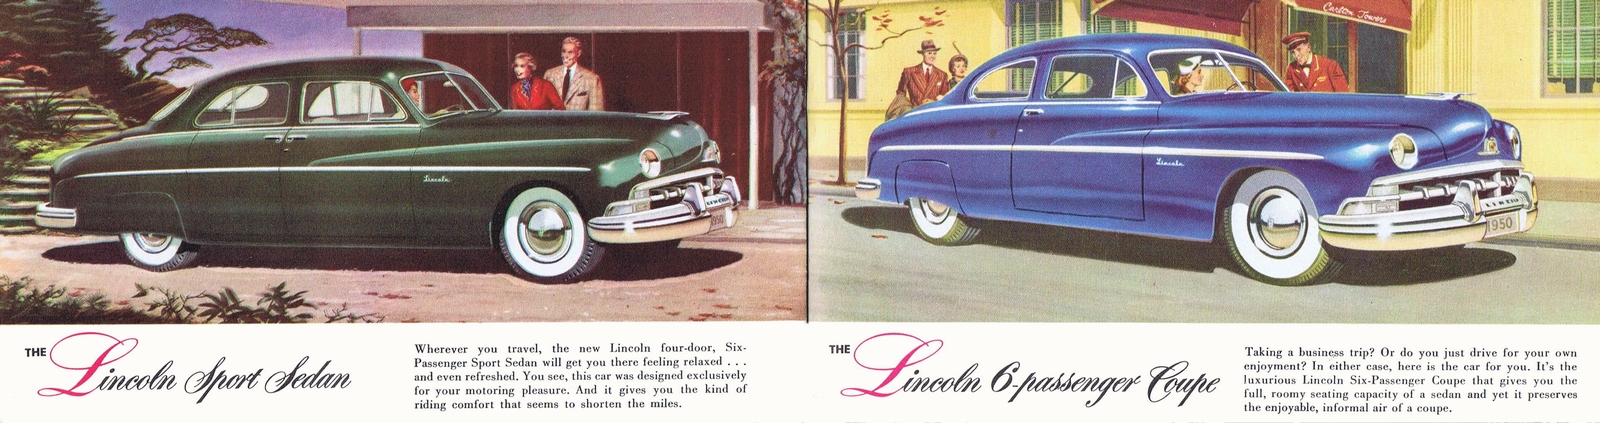 n_1950 Lincoln Quick Facts-08-09.jpg